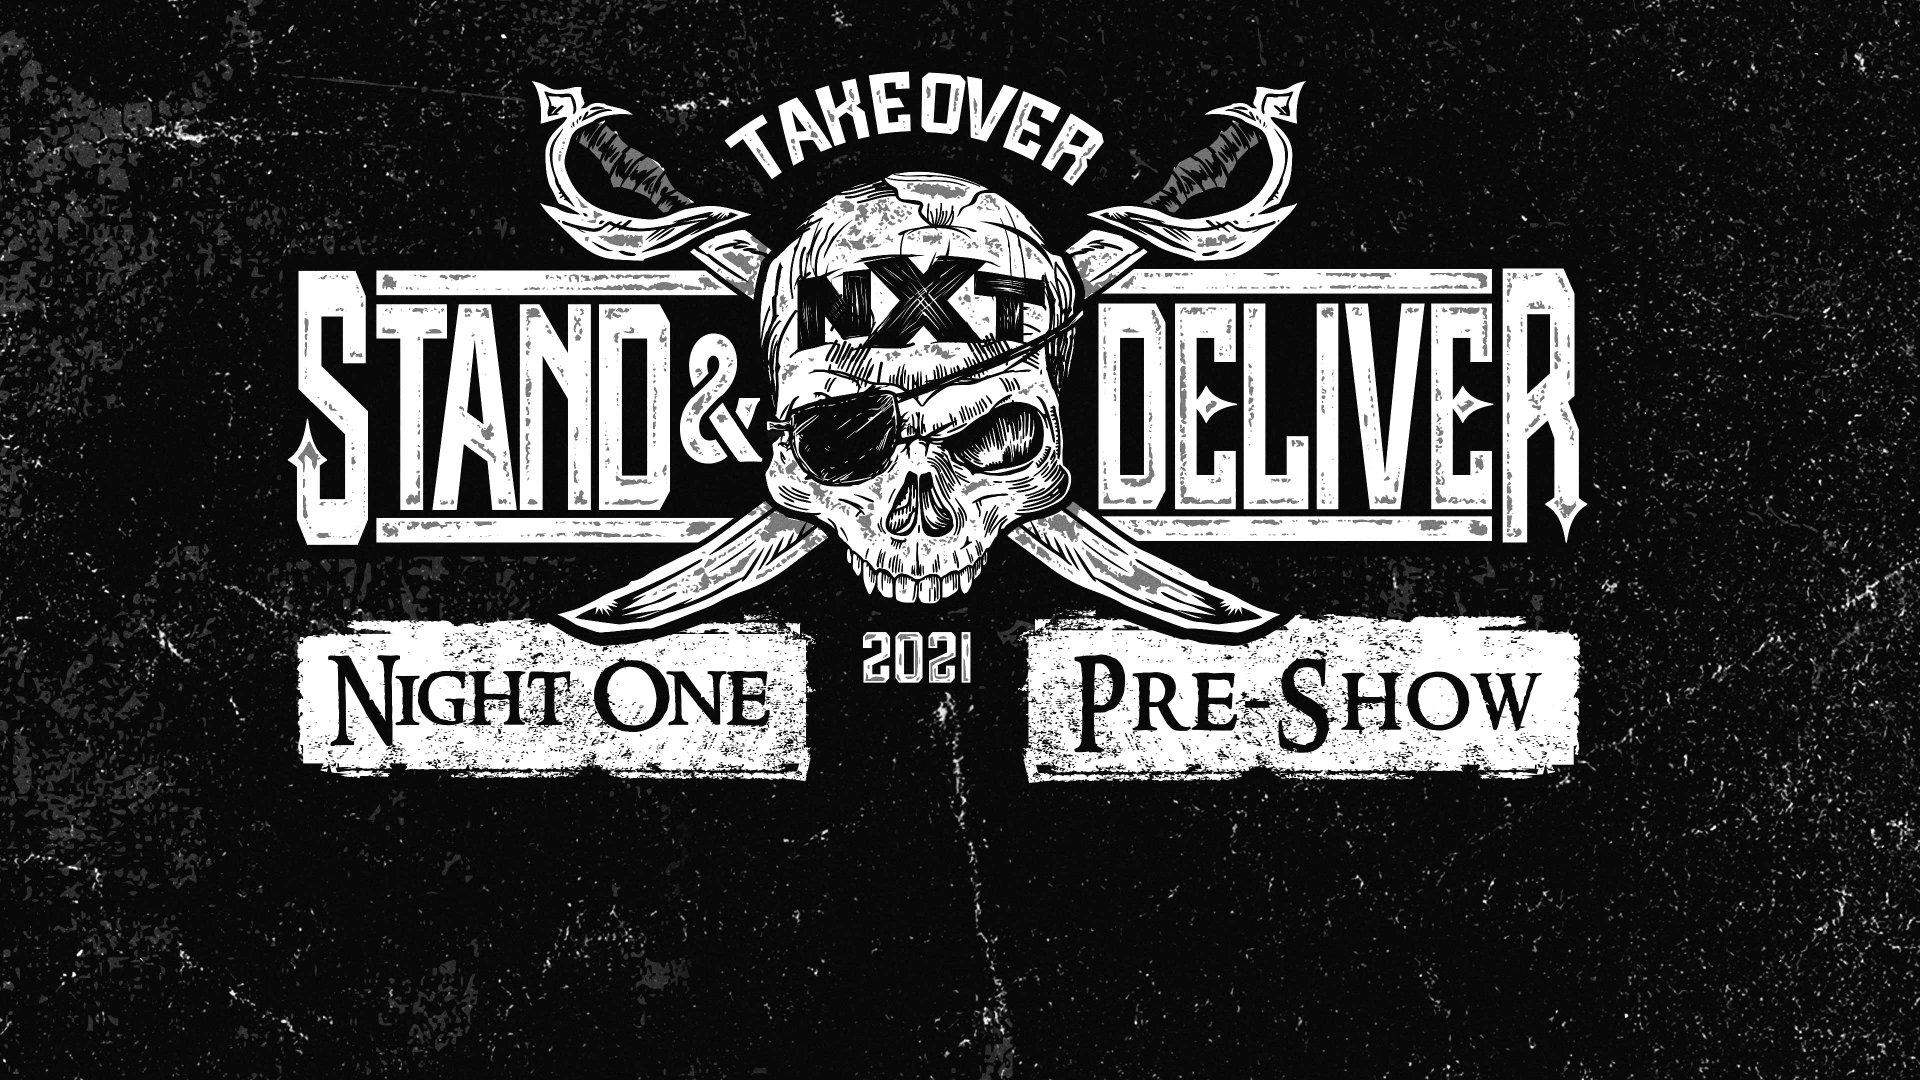 WWE NXT TakeOver: Stand & Deliver 2021 Pre-Show (Night 1)